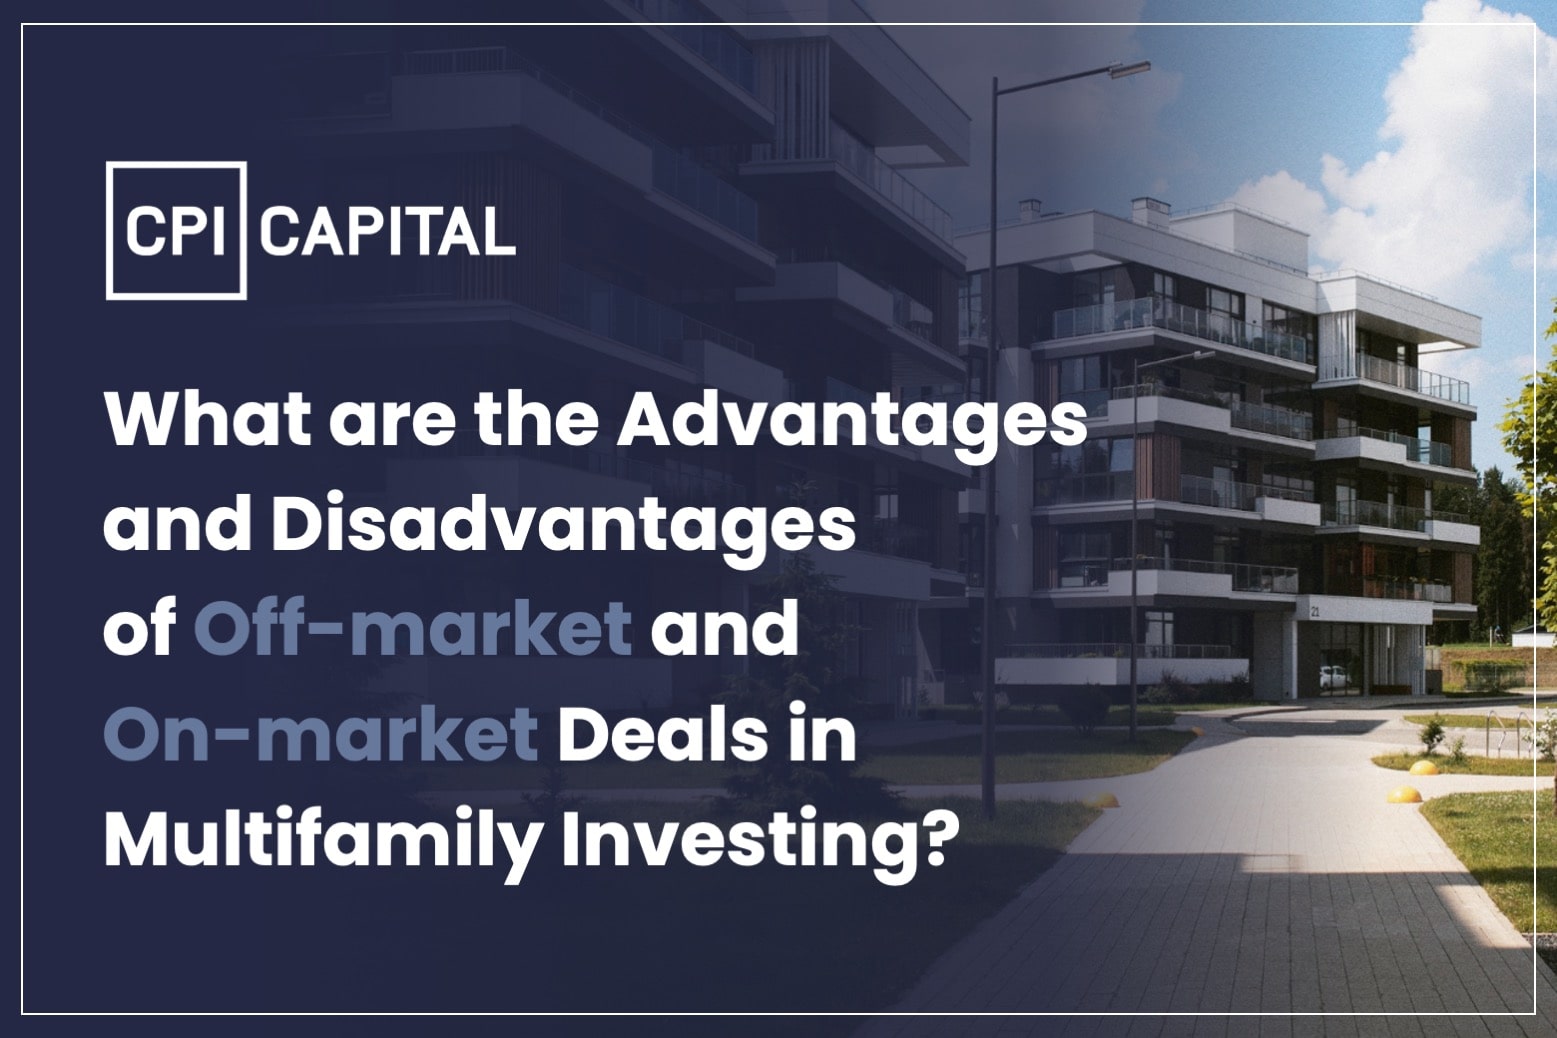 What are the Advantages and Disadvantages of Off-market and On-market Deals in Multifamily Investing?